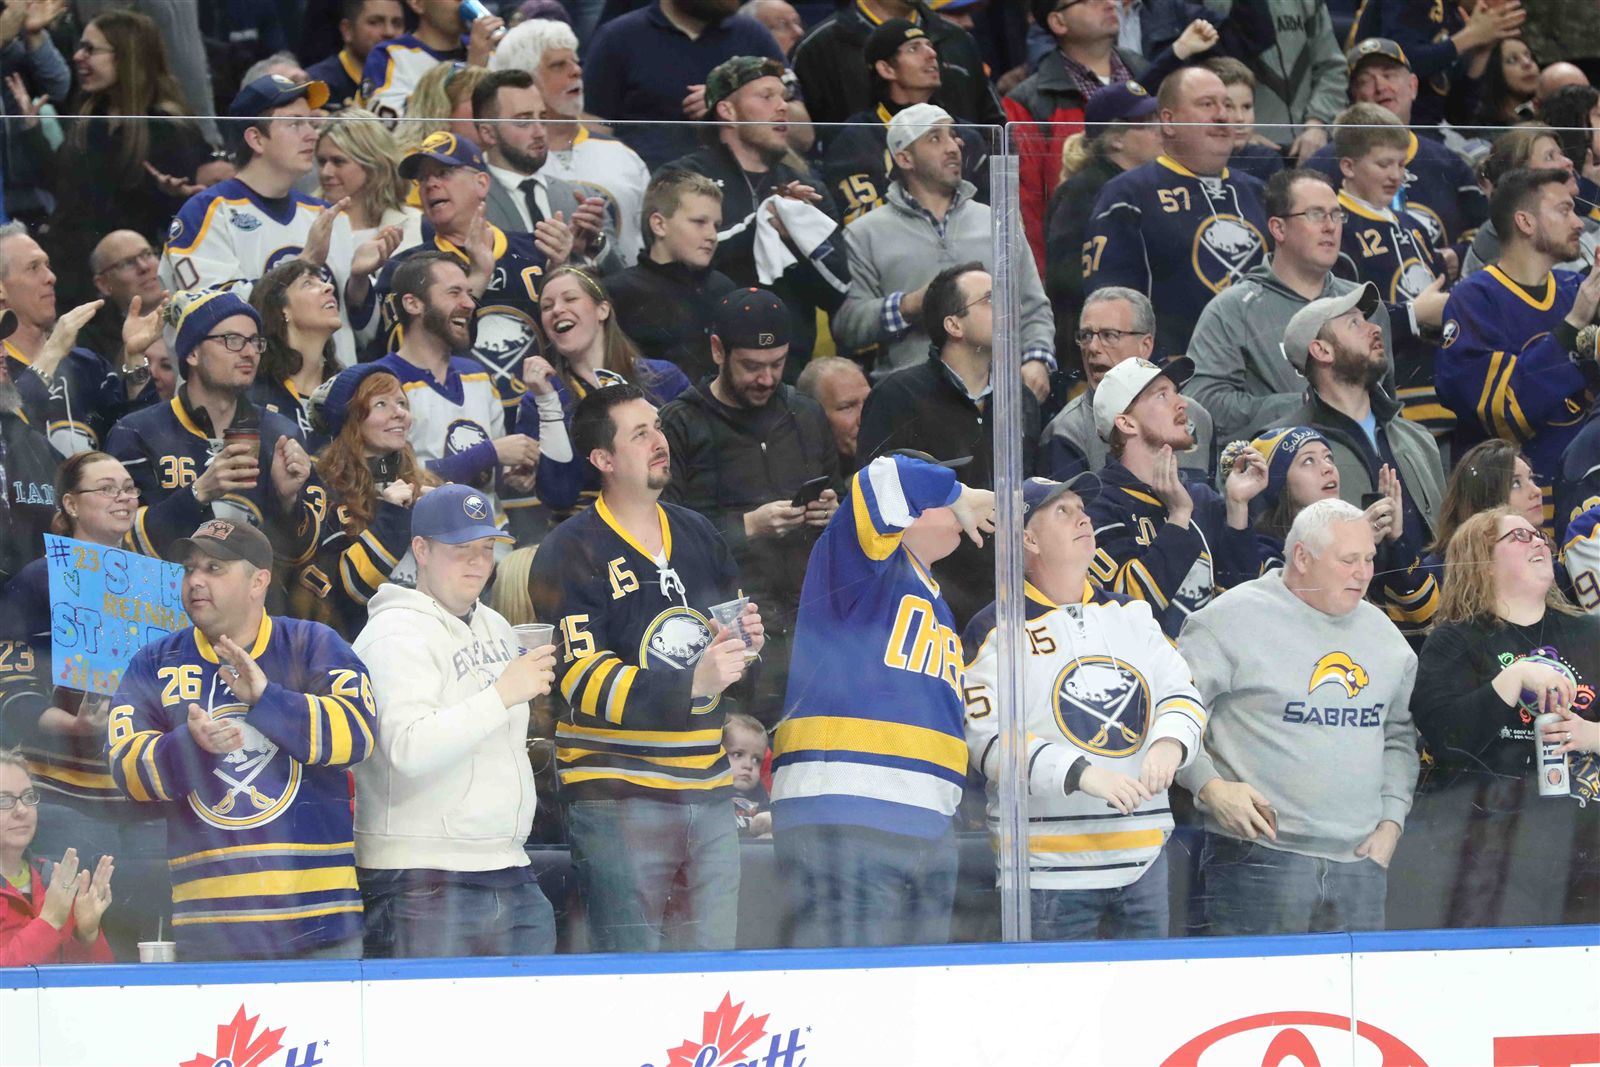 Sabres announce Kids Day Party in the 